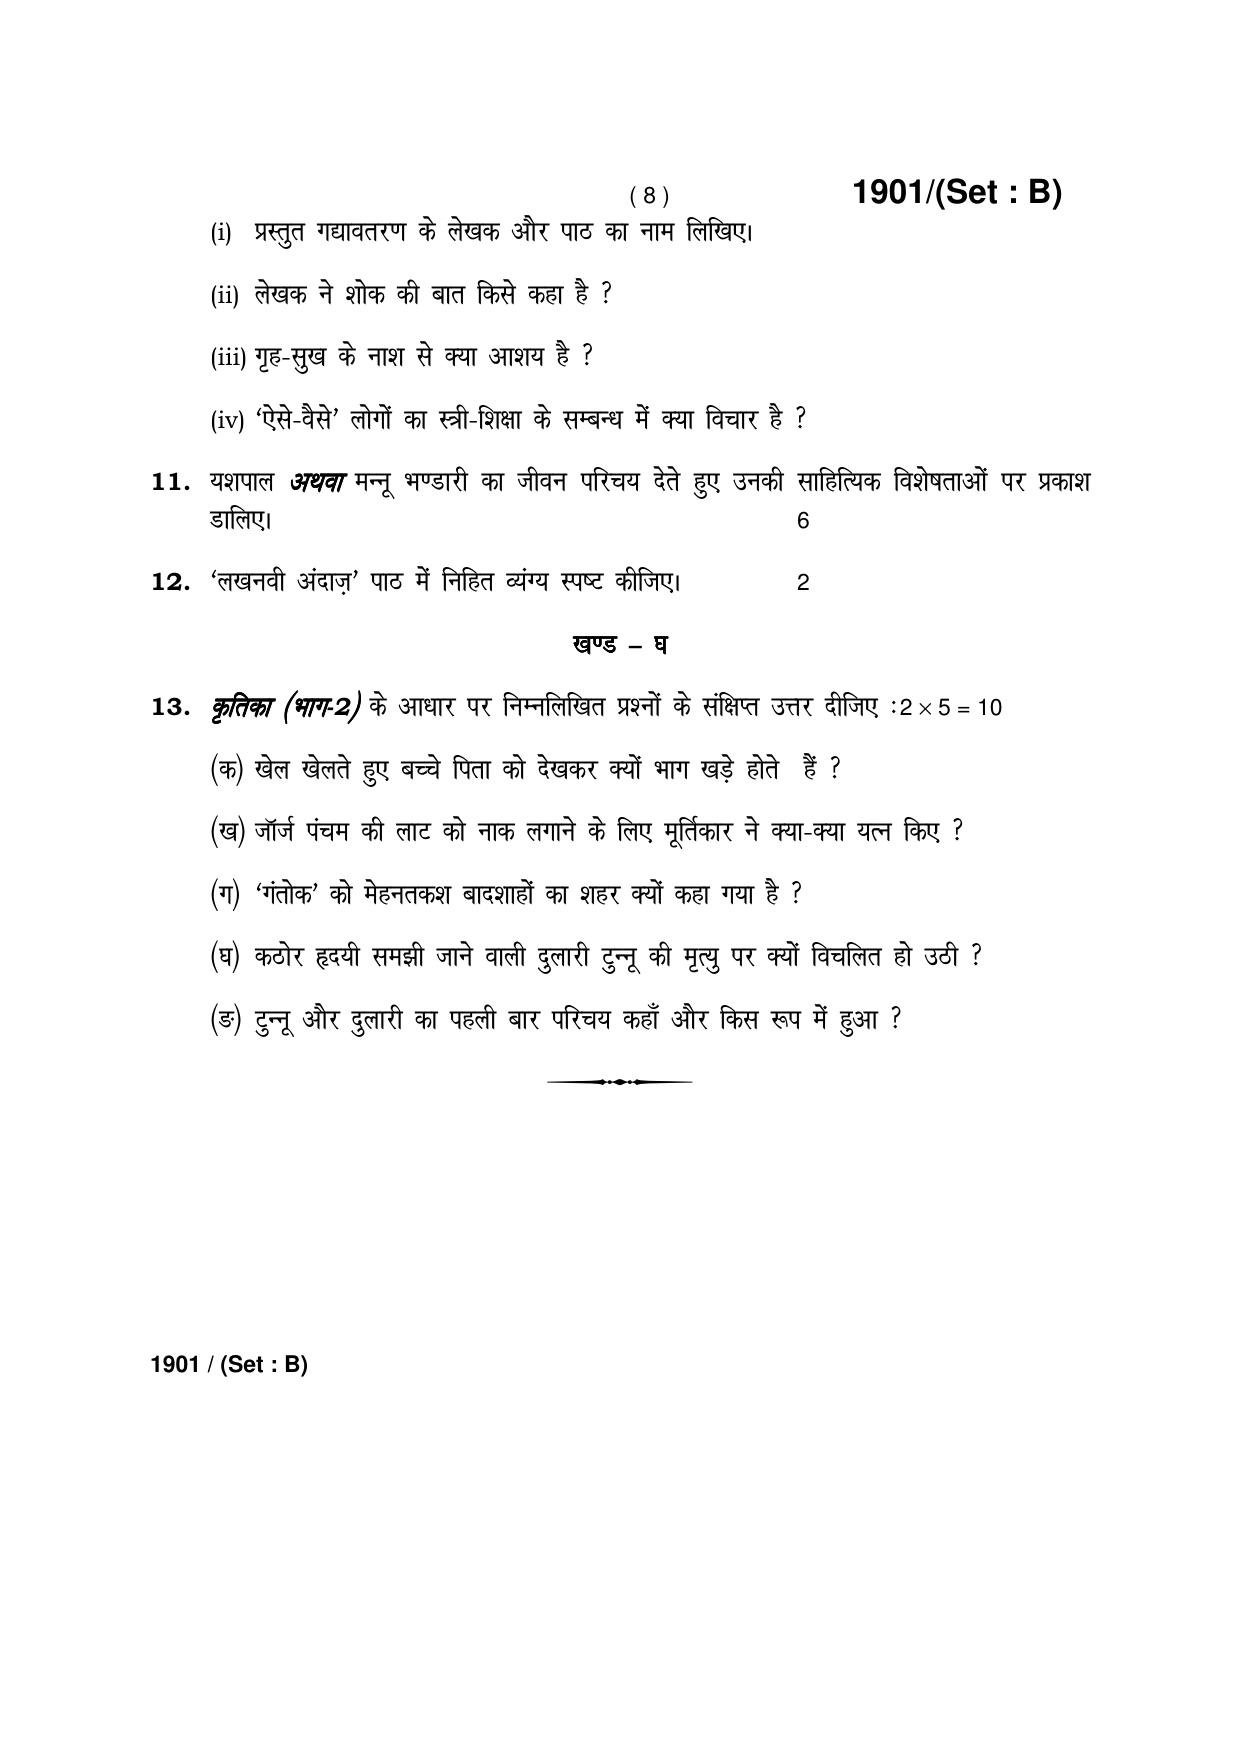 Haryana Board HBSE Class 10 Hindi -B 2017 Question Paper - Page 8